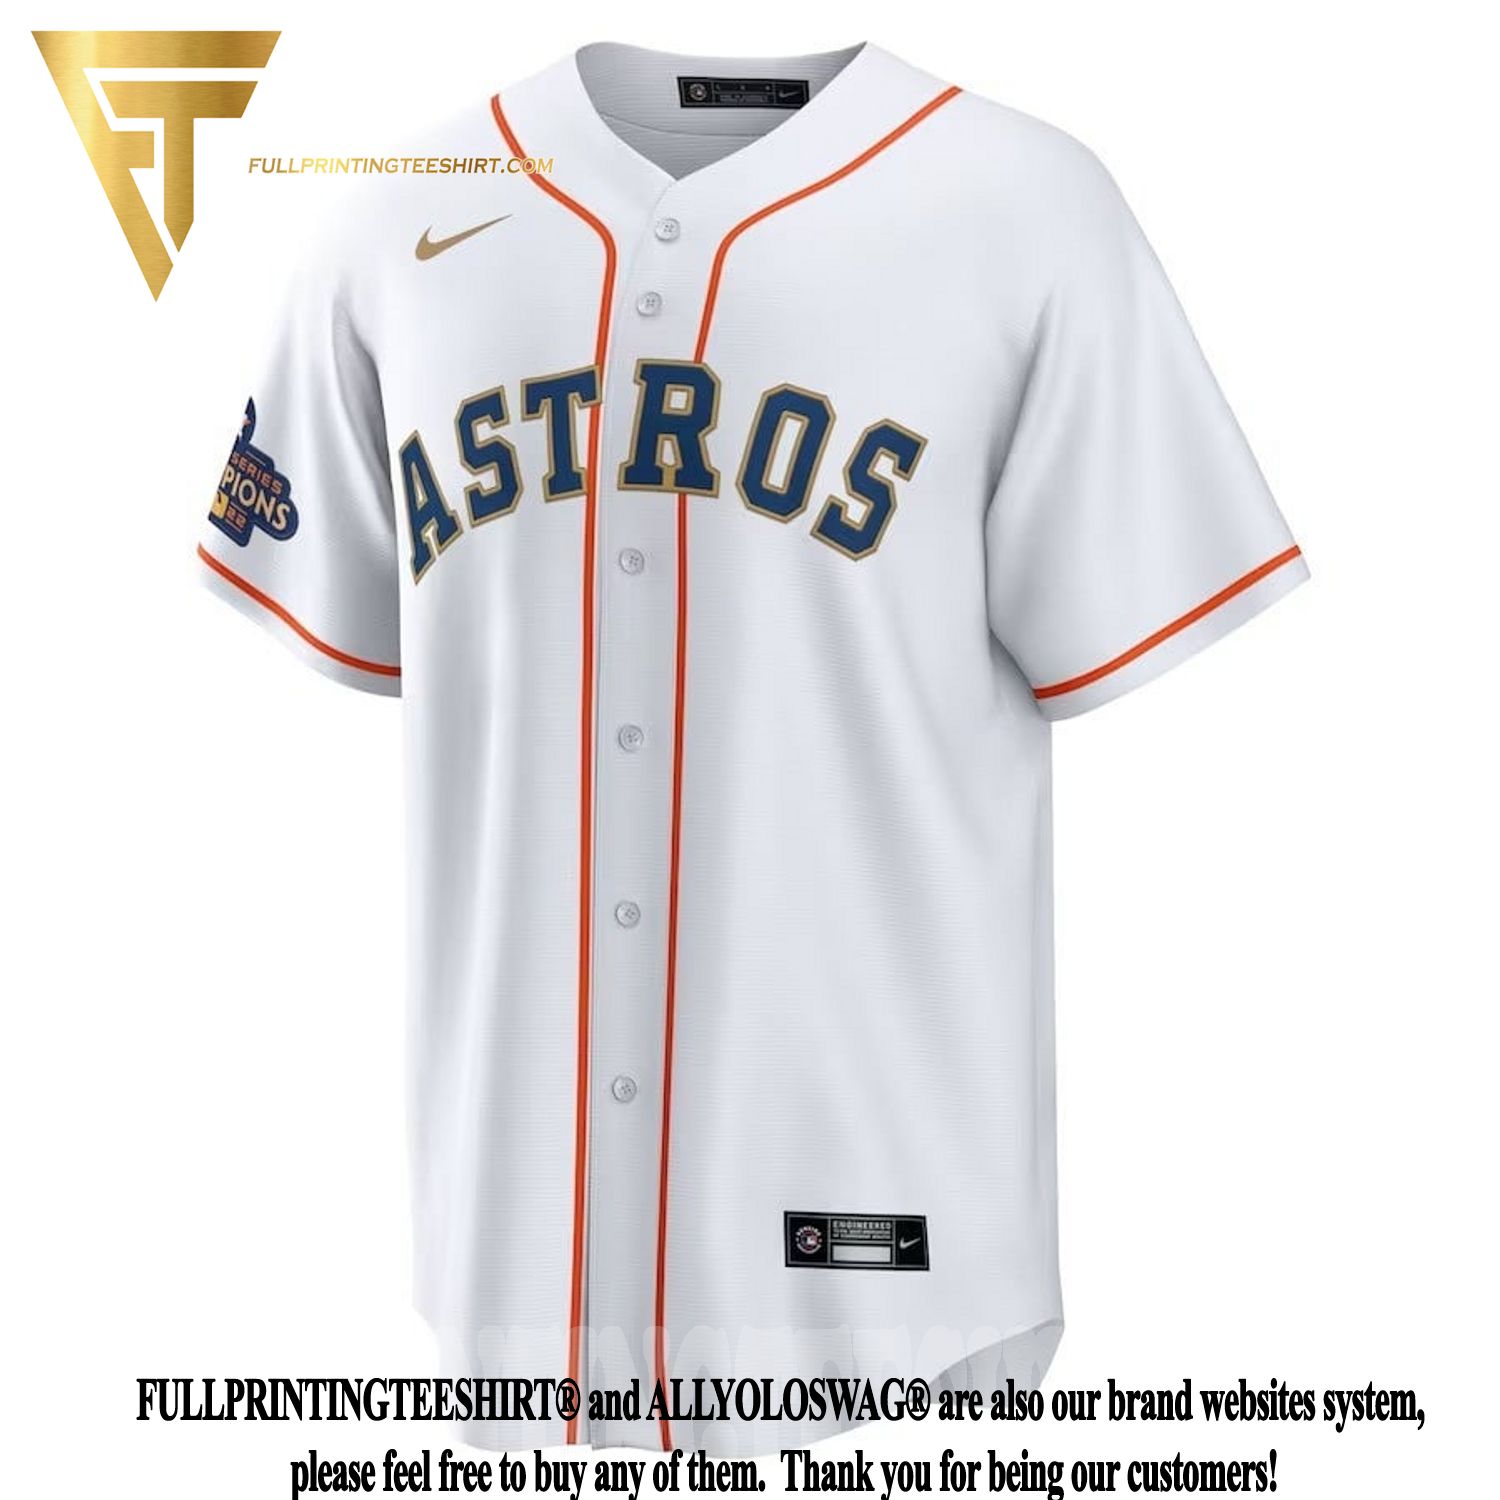 Top-selling Item] Cristian Javier 53 Houston Astros 2023 Gold Collection  Men - White And Gold